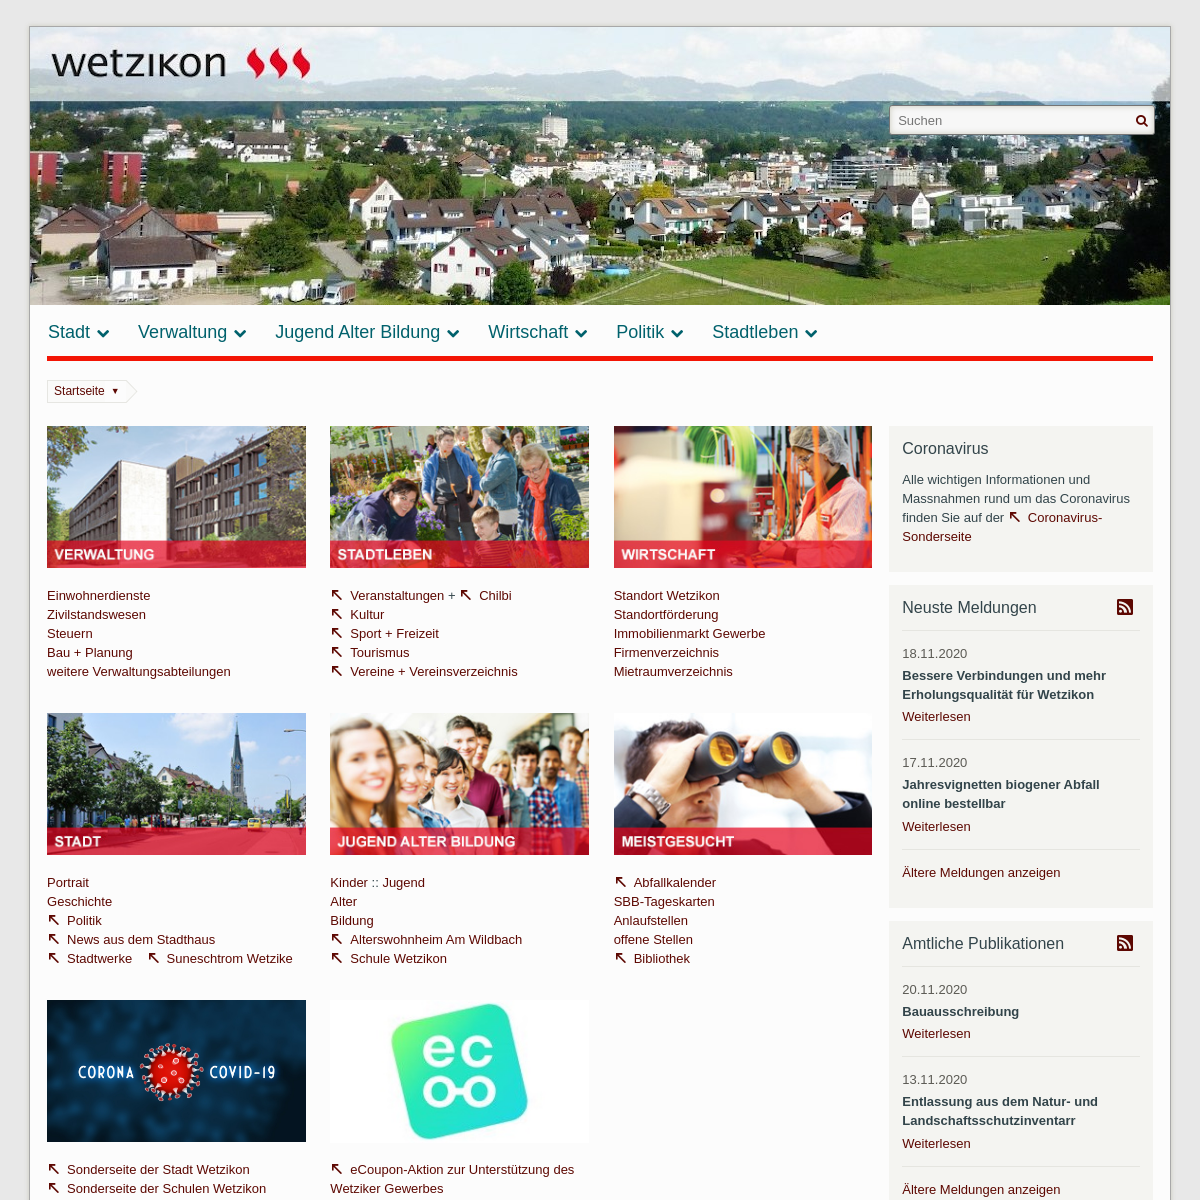 A complete backup of wetzikon.ch